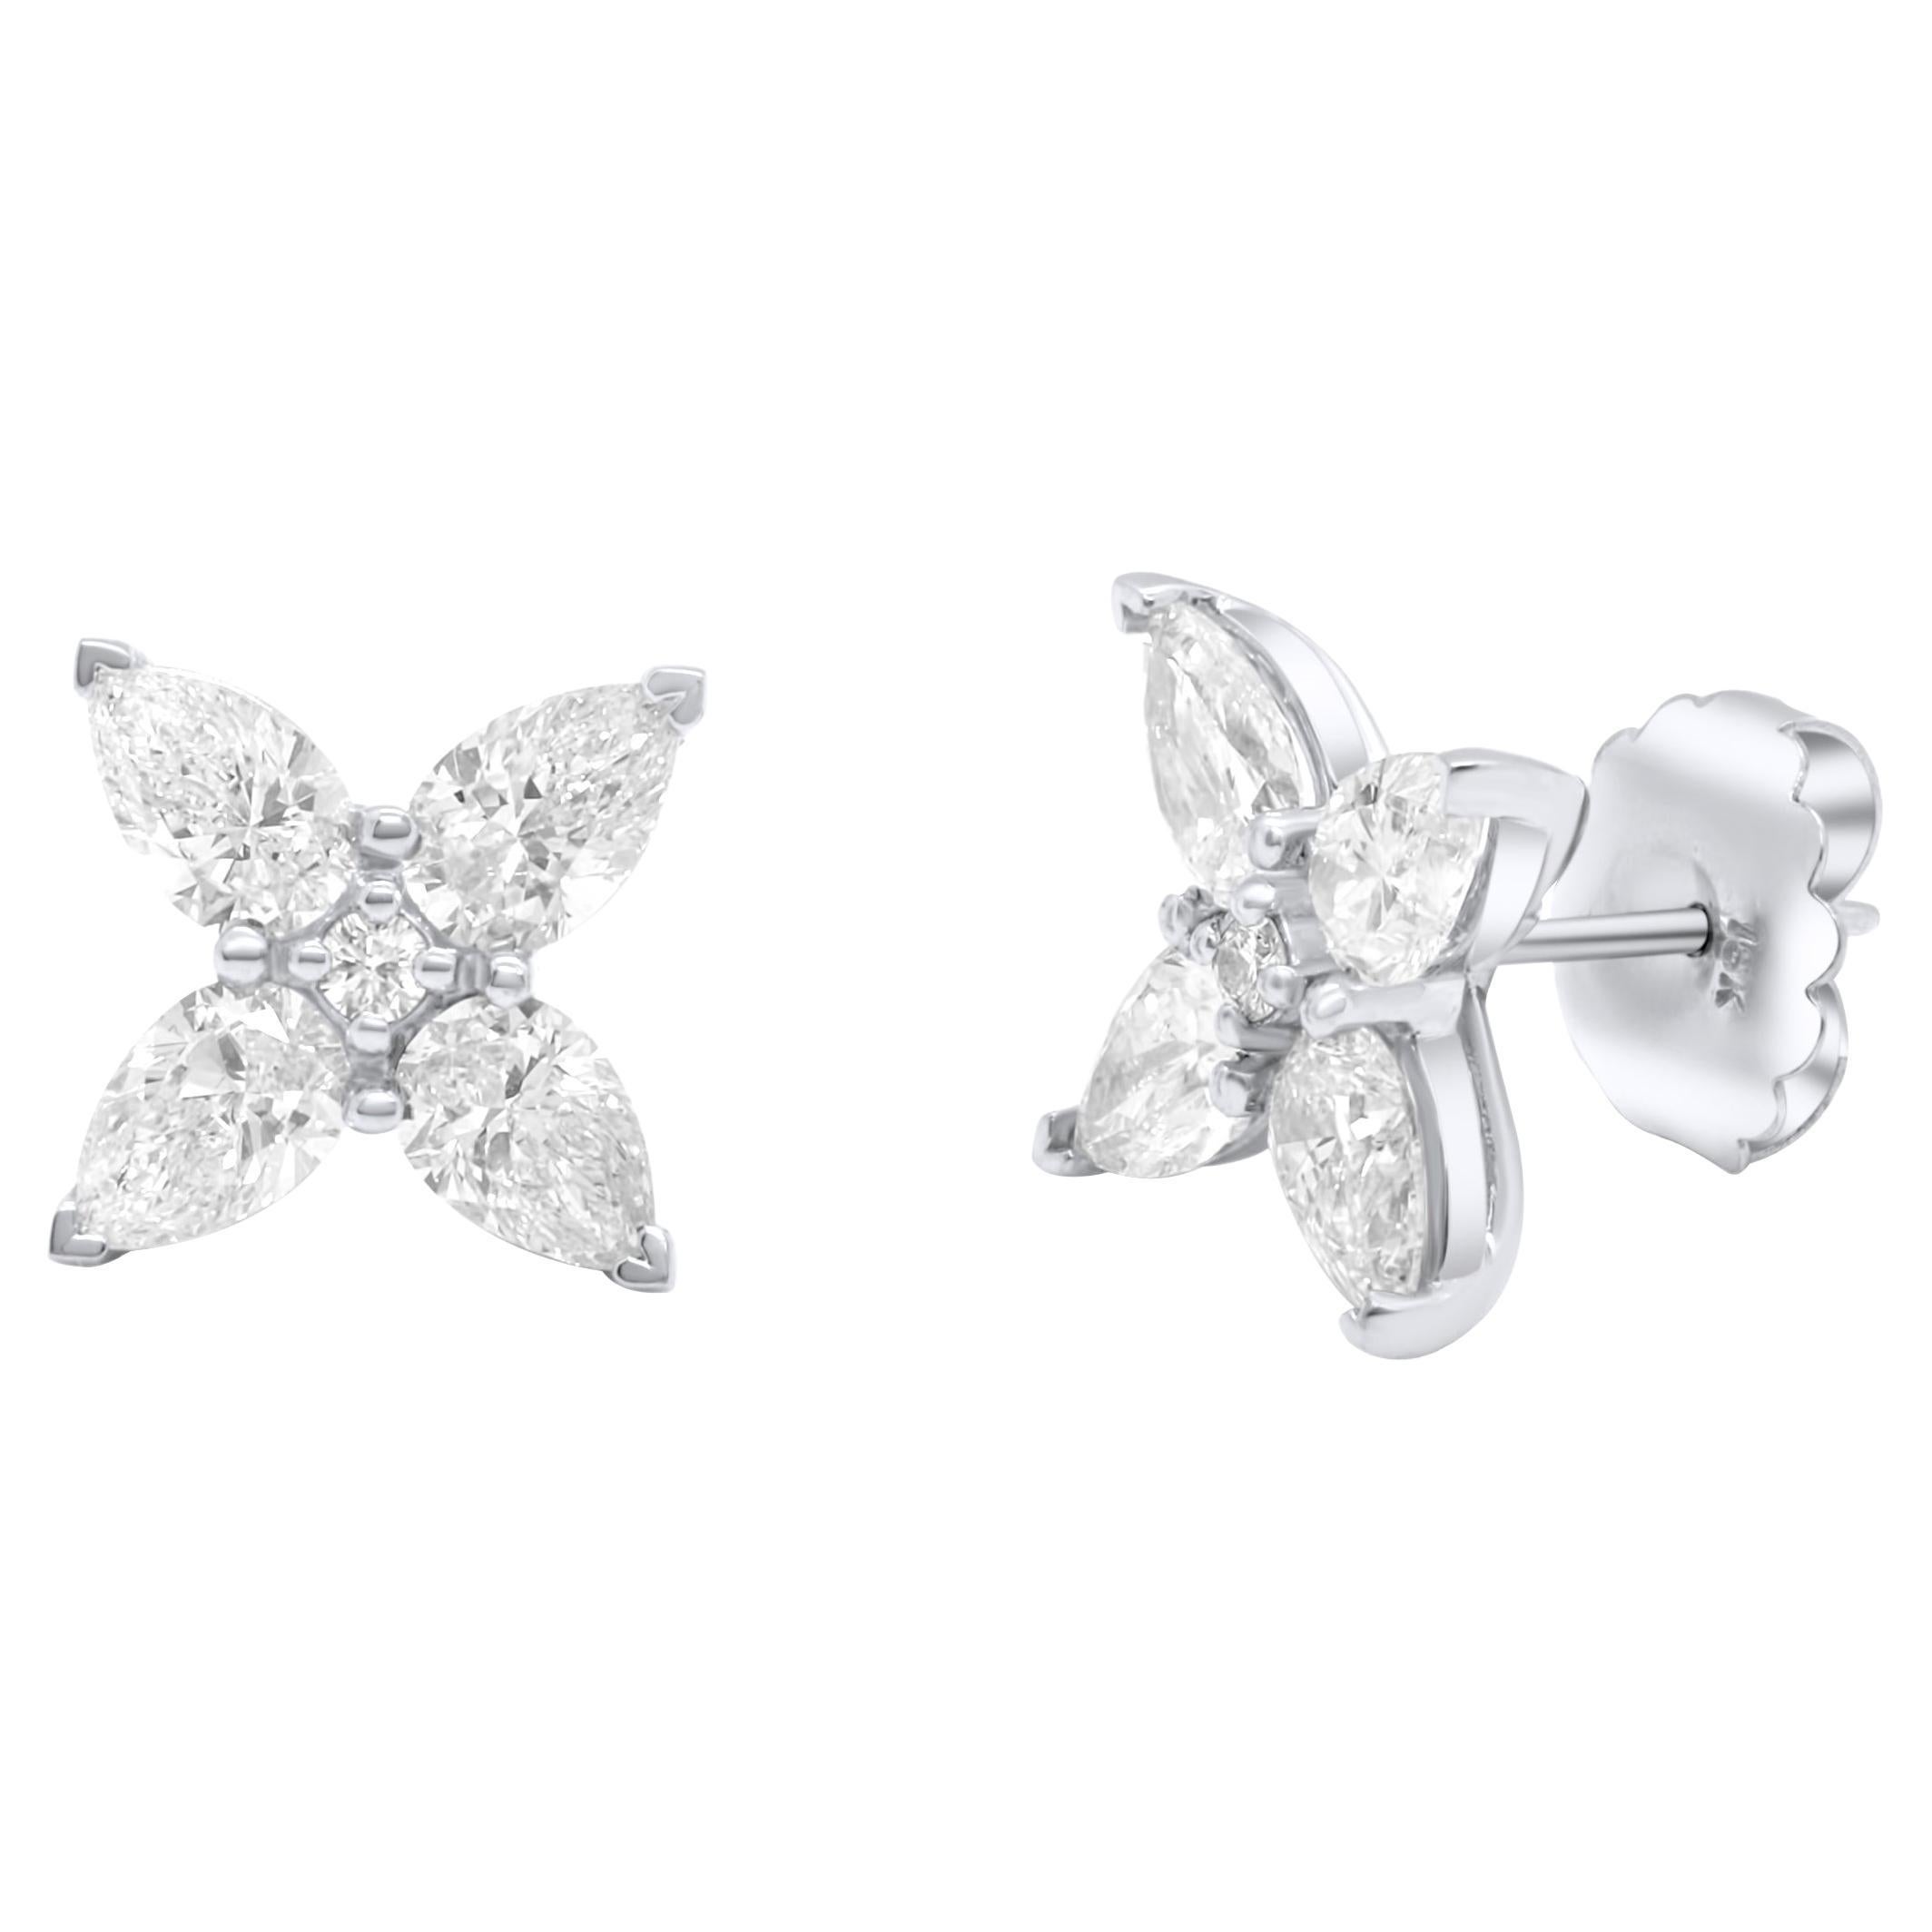 Diana M. PLATINUM EARRING STUDS WITH PEAR SHAPE DIAMONDS 4.09CTS  For Sale